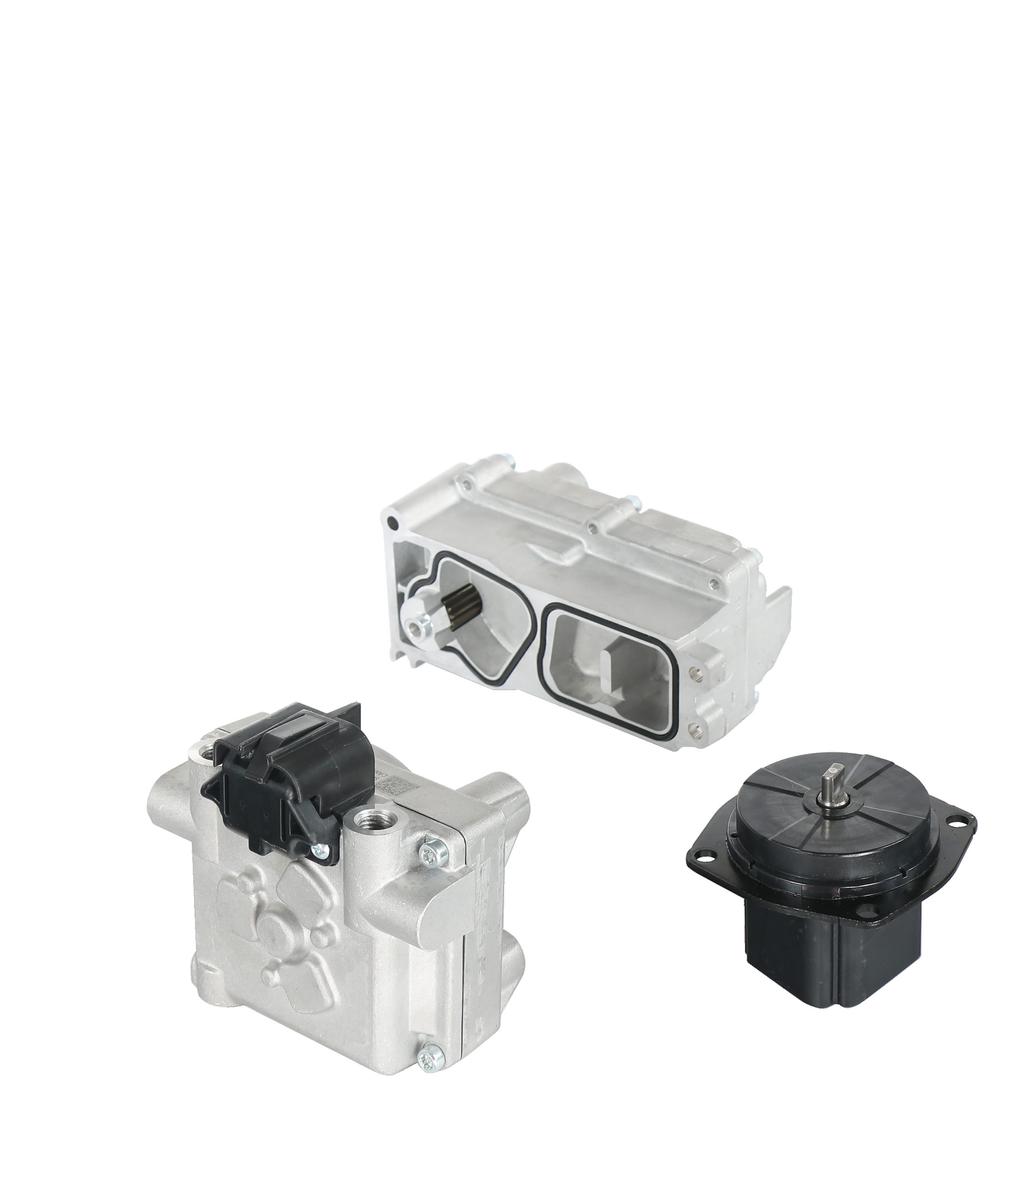 Actuators With over 1 million units on the road today, CTS actuators for the transportation industry offer precision mechatronic solutions that are ideally suited for extreme temperature, high torque